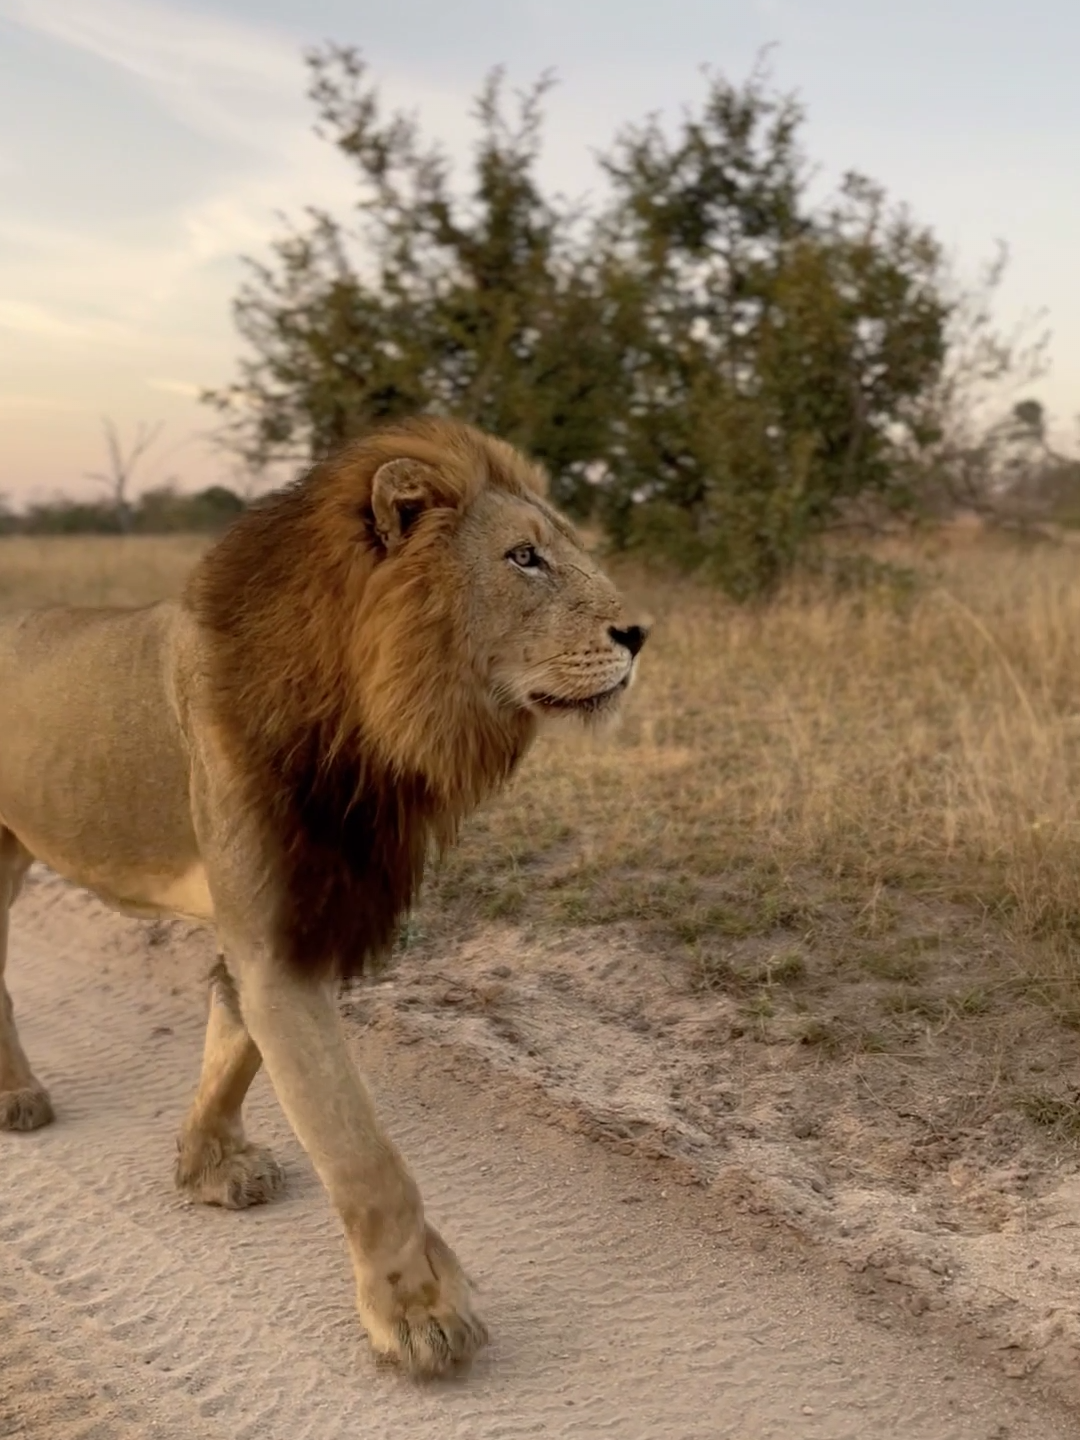 Get up close and personal with this magnificent male lion as he casually strolls past one of our vehicles! 🦁 #lion #lionsoftiktok #catsoftiktok #safari #wildlife #natgeowild #southafrica